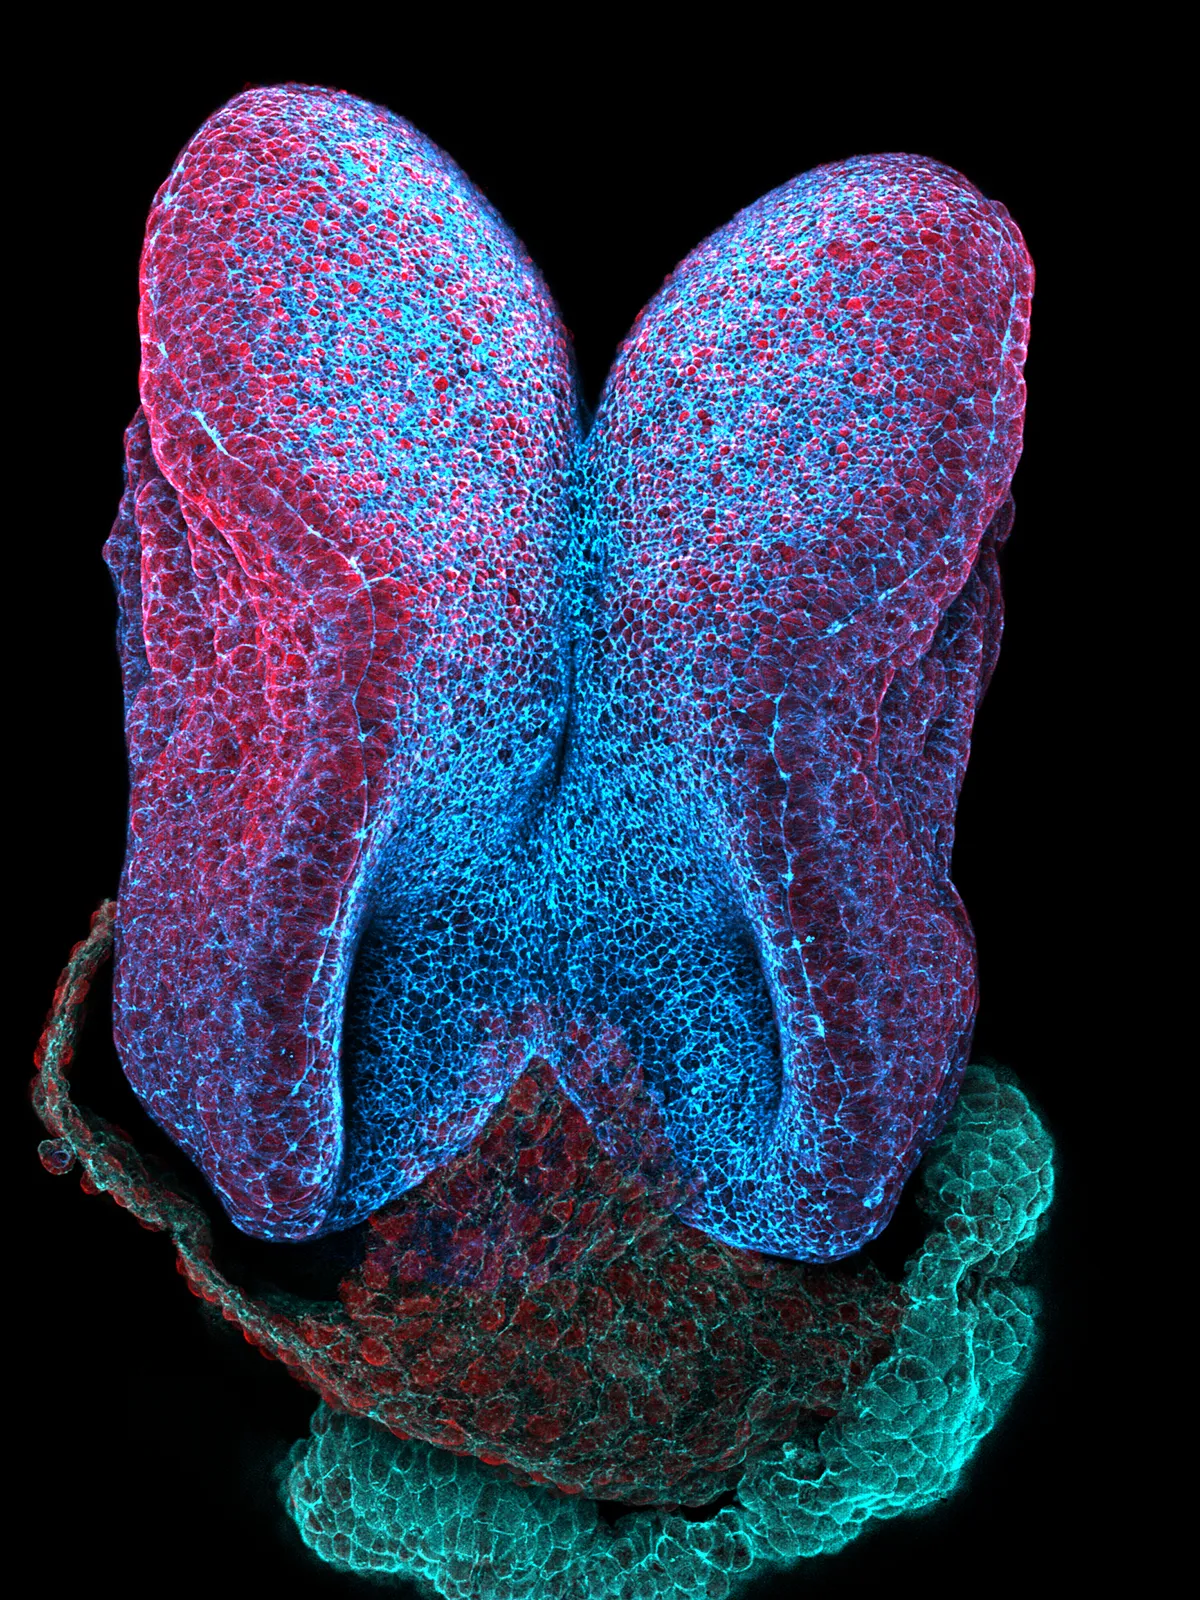 'Split brain' was entered by Dr Gabriel Galea, Wellcome Clinical Research Career Development Fellow at UCL GOS ICH. This image shows the very early development of a mouse embryo brain. At this stage when the embryo is just two millimetres long, the brain is split down the middle, each side developing independently. The left and right halves can be seen gradually folding to meet each other, like two butterfly wings coming up to meet at the tips. Eventually these folds meet in the middle, fusing into a single brain. In around 1 in every 1,000 pregnancies either the brain or spinal cord fail to close together. Failure to fully close the brain causes a deadly malformation known as anencephaly. Gabriel's team are trying to understand what causes anencephaly and how we may prevent it by studying the closing process in their lab.